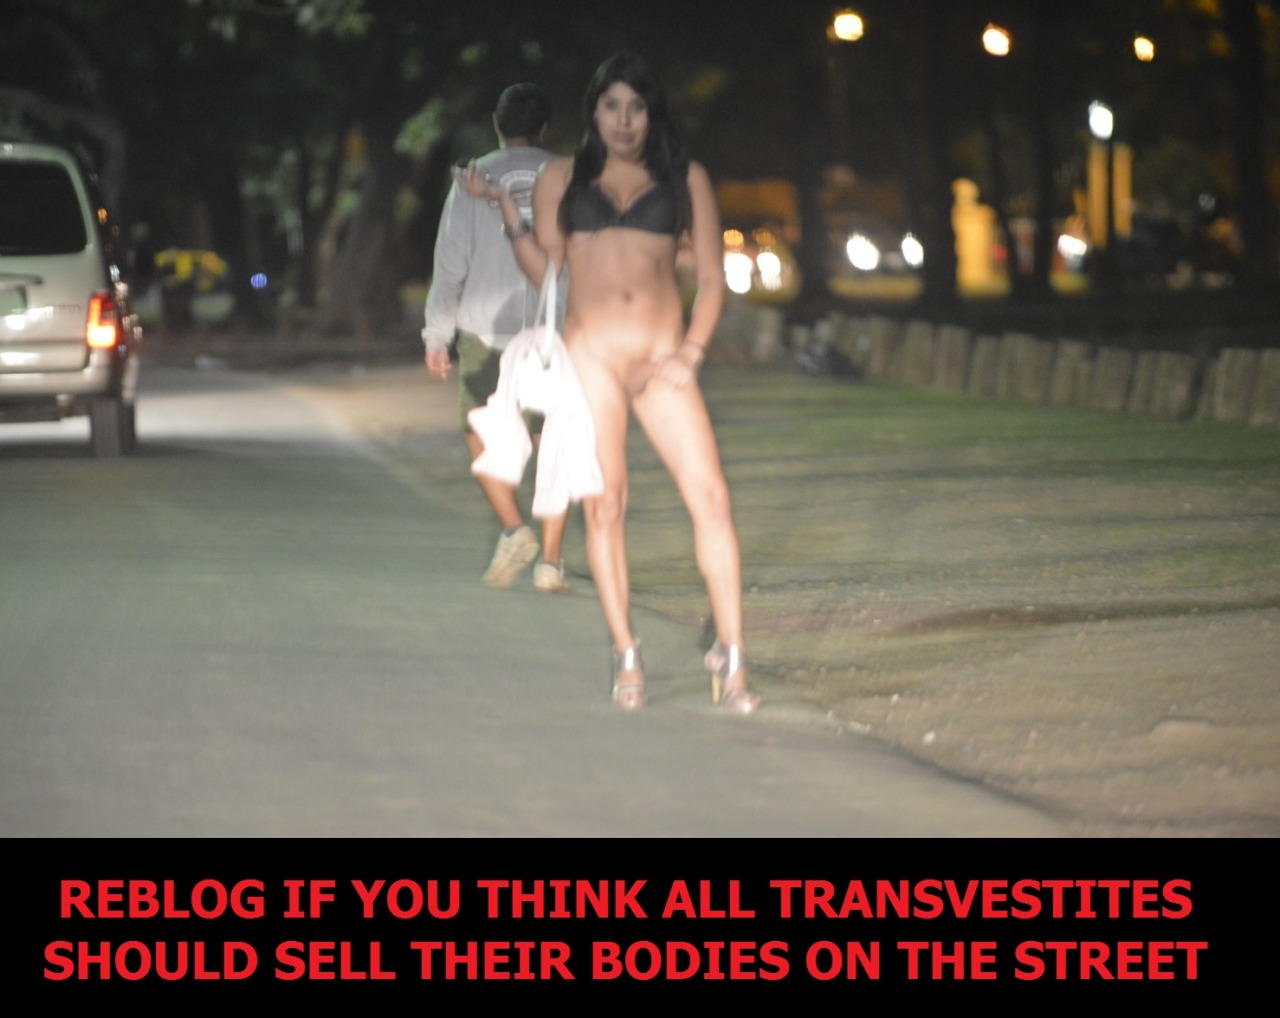 Tranny prostitute hookers on the street